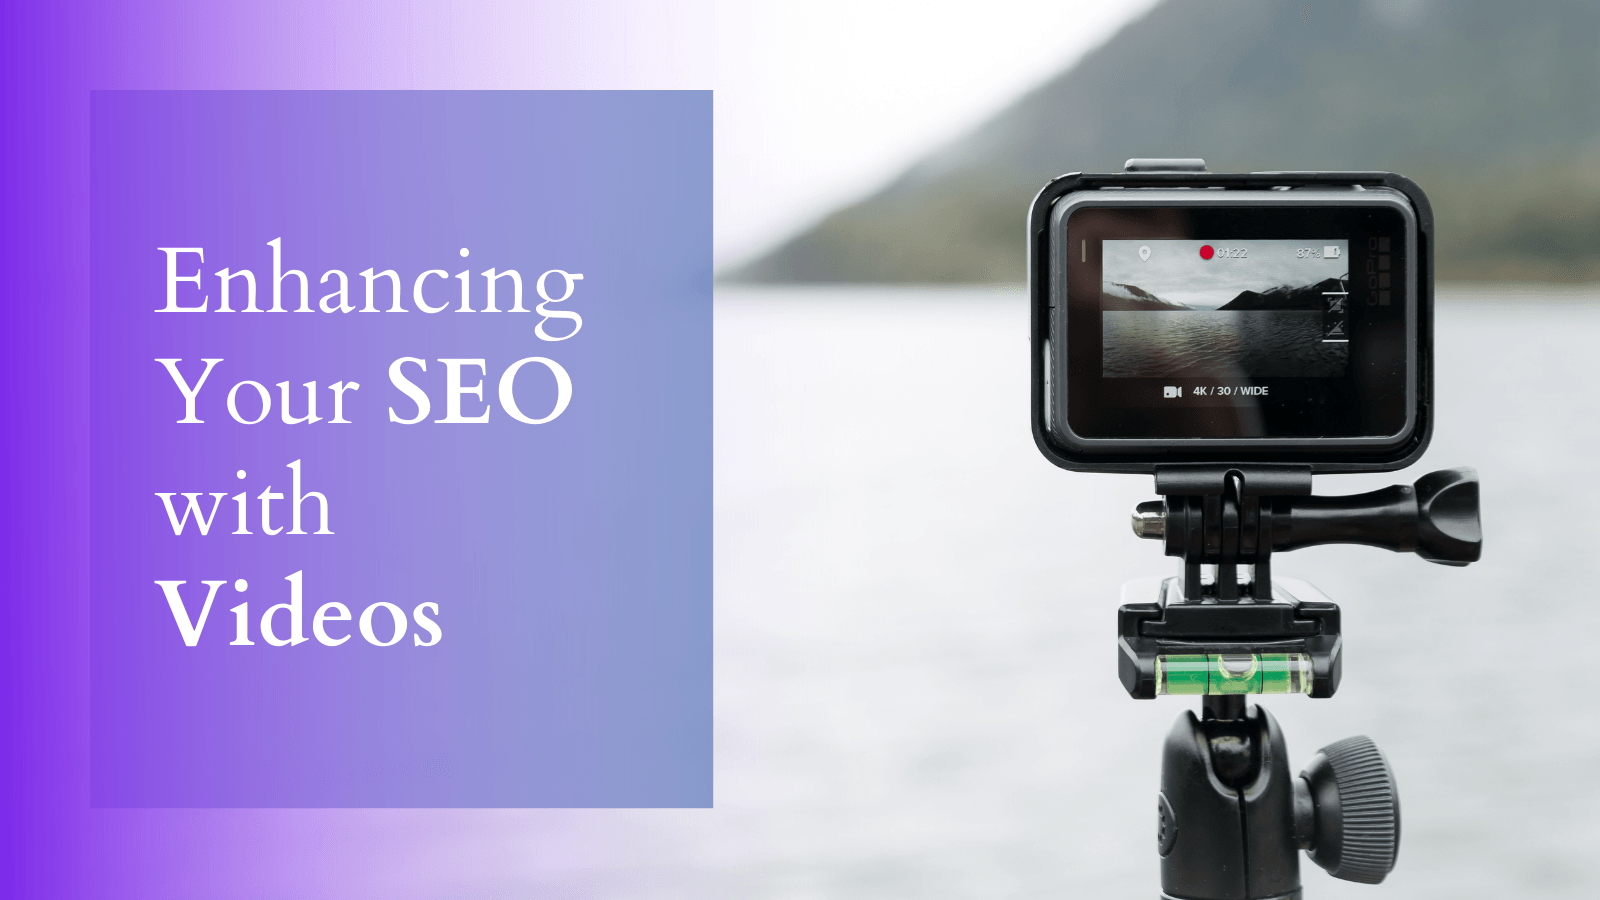 Enhancing Your SEO with Videos